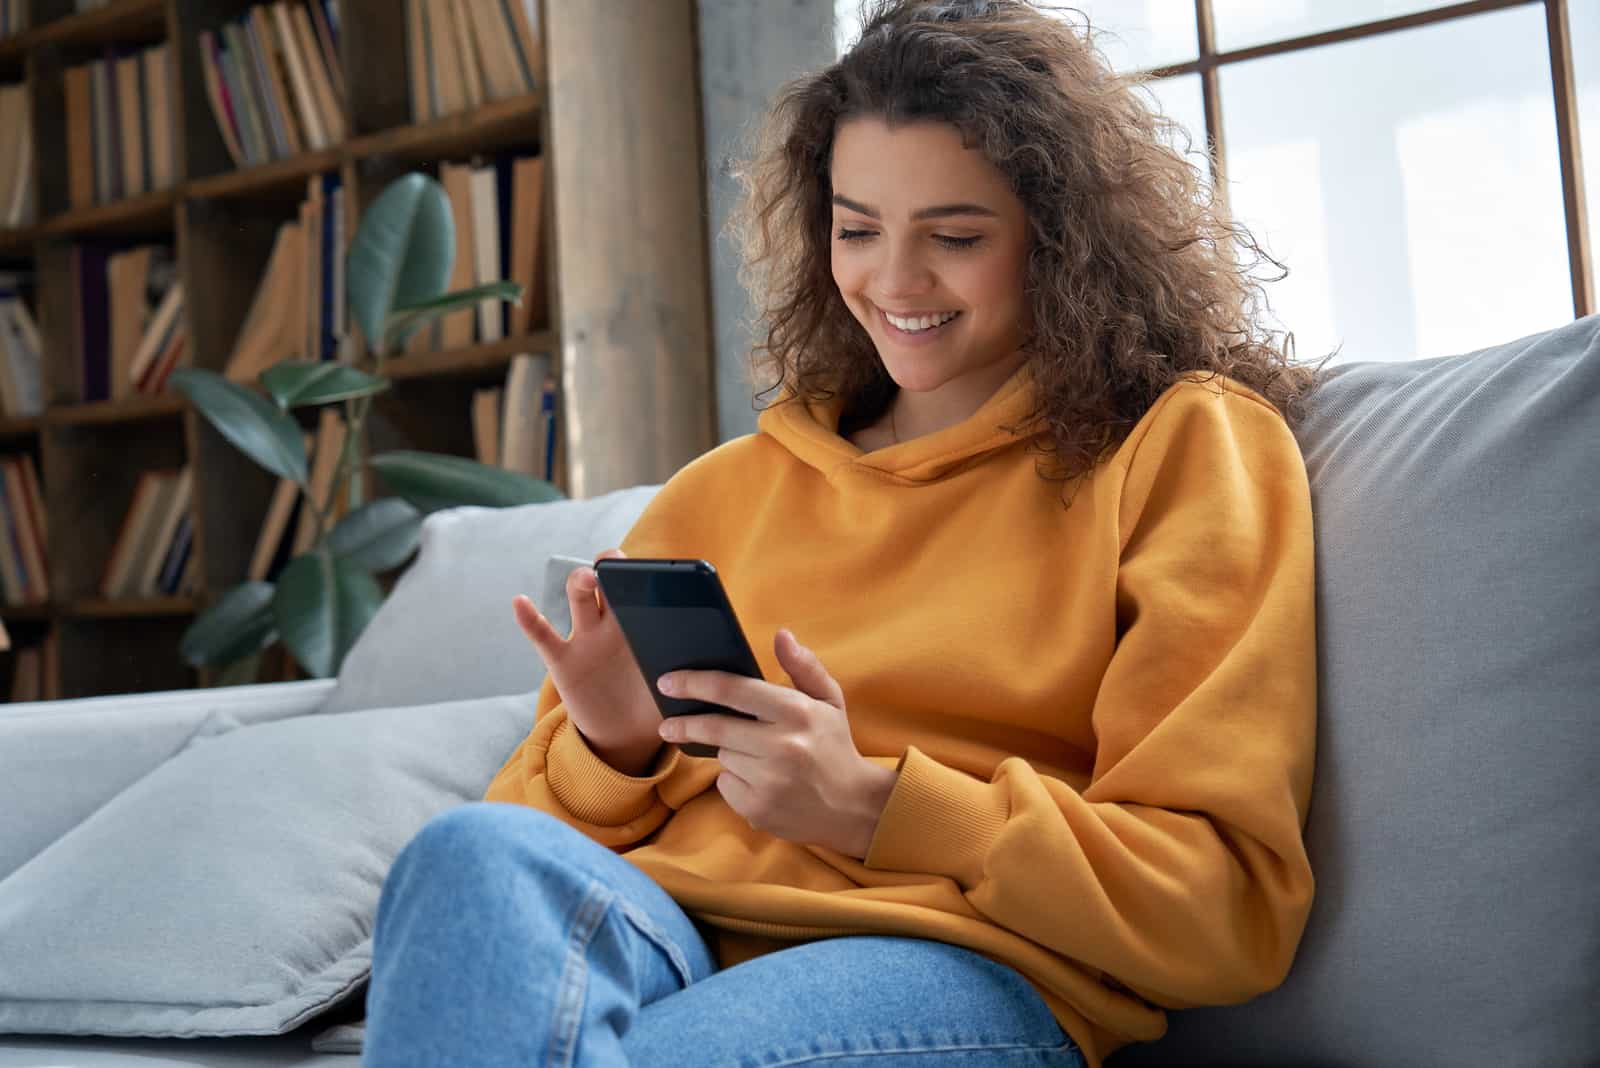 a smiling woman with frizzy hair sits on the couch and holds the phone in her hand